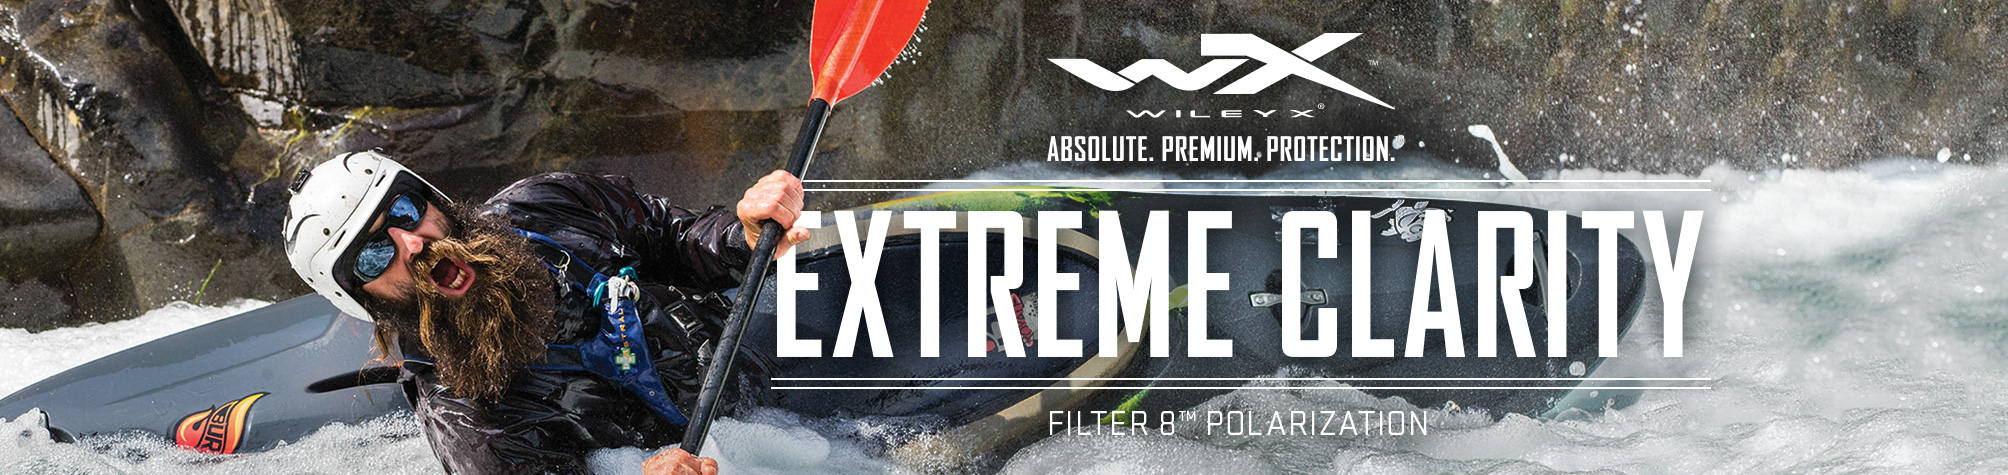 Wiley X Outdoor Extreme Clarity Banner